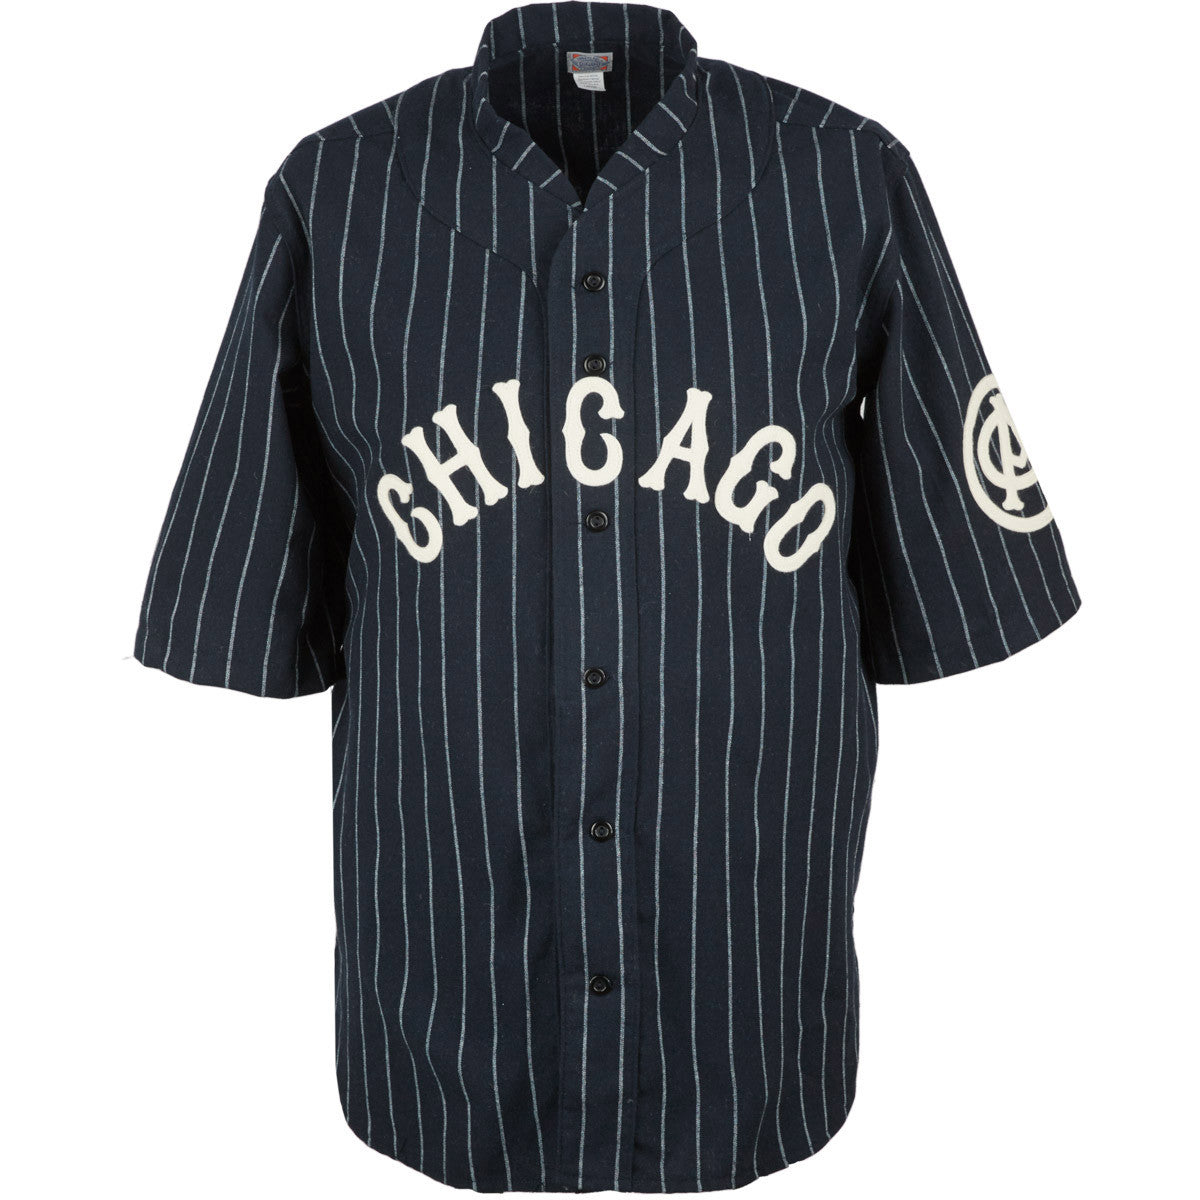 Chicago American Giants 1926 Road Jersey